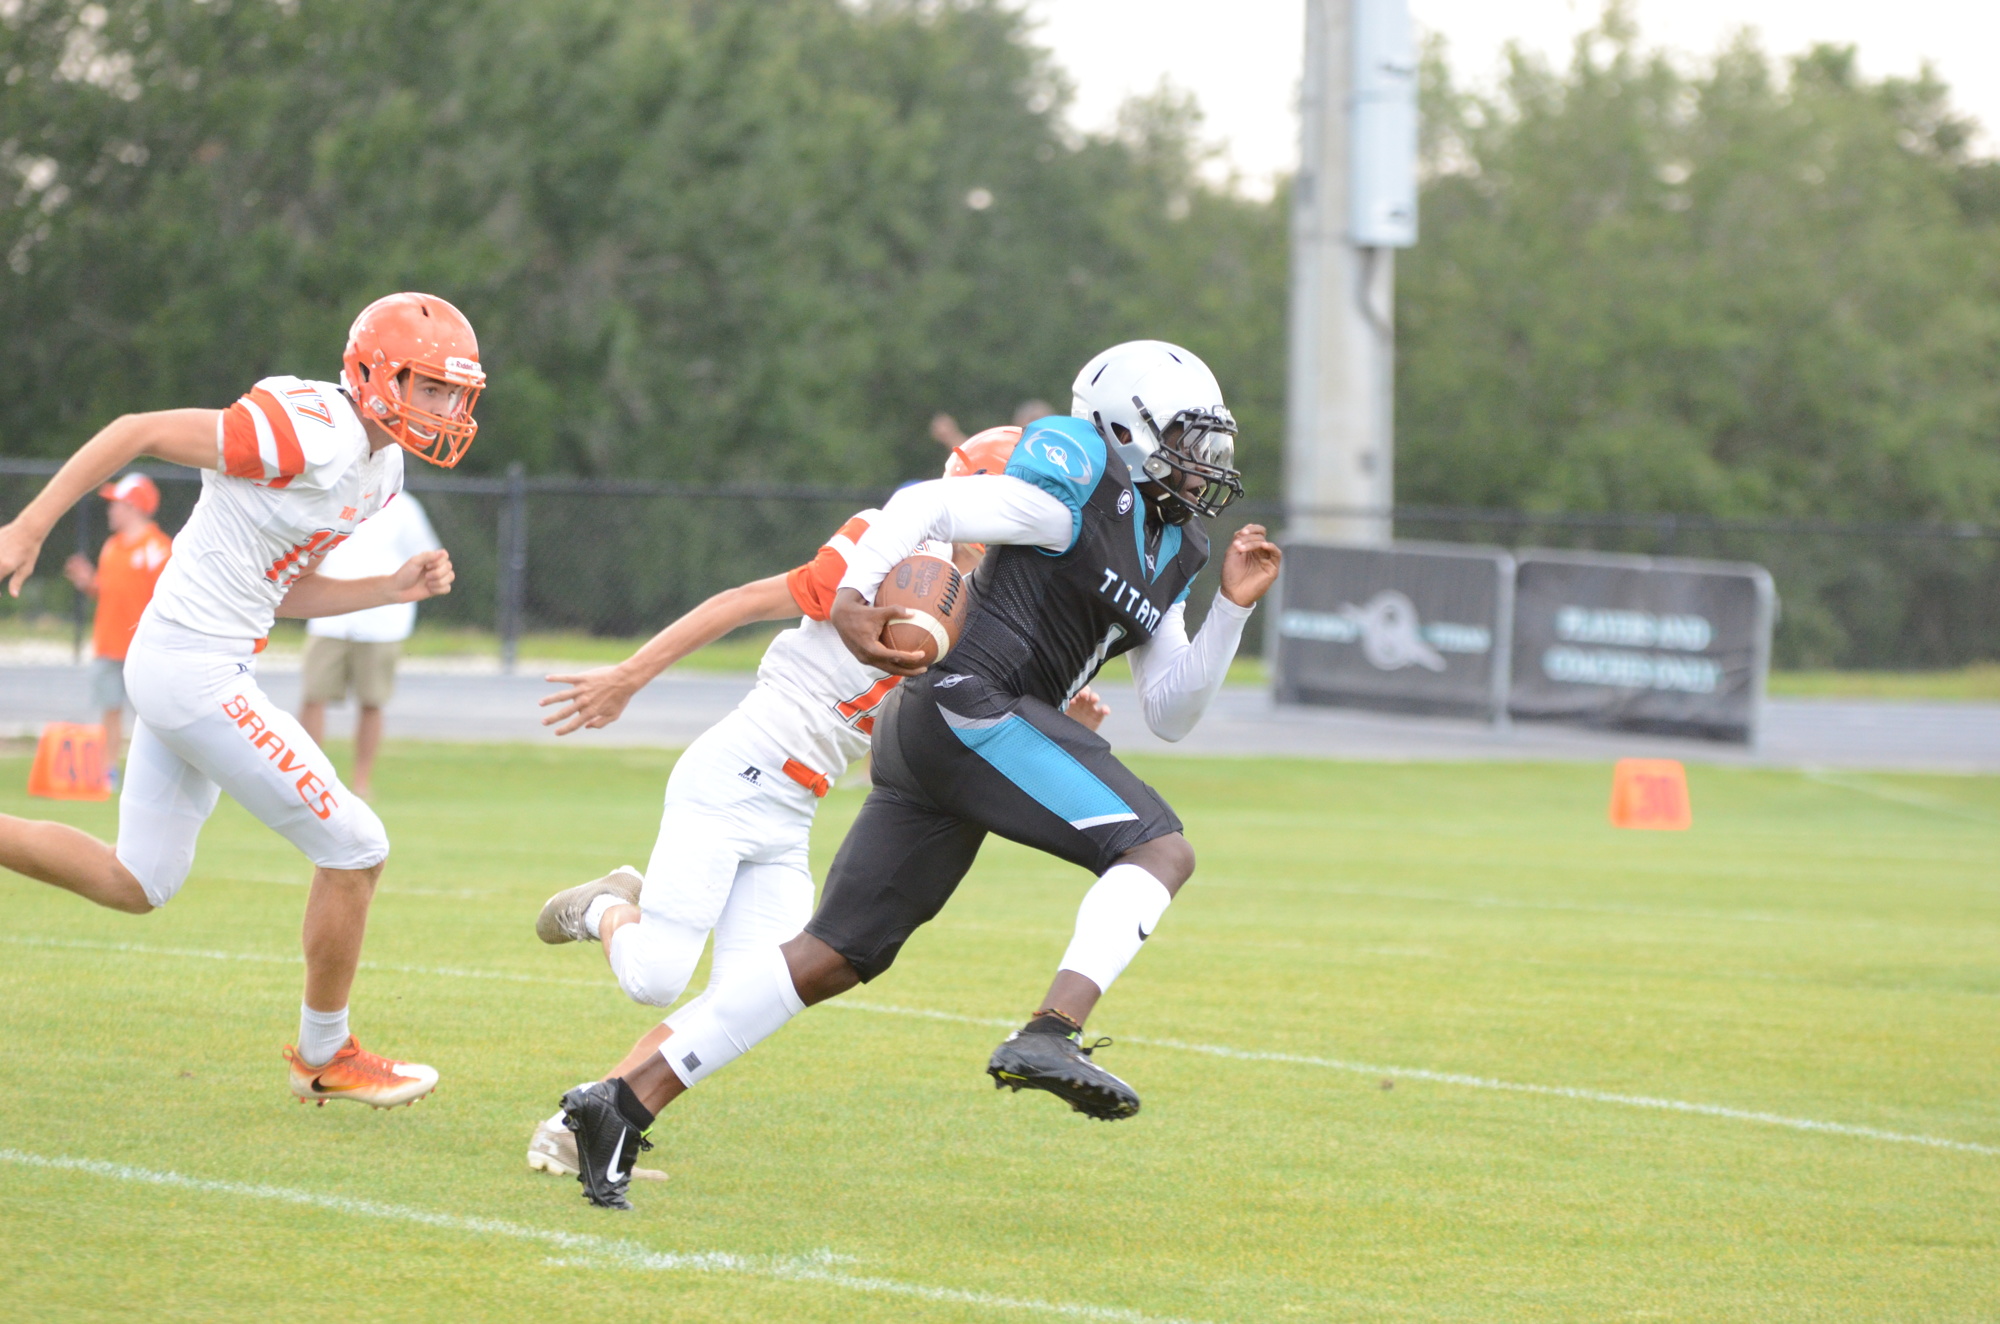 Tealson Jean breaks away for a touchdown for the Titans on the first play from scrimmage May 11.